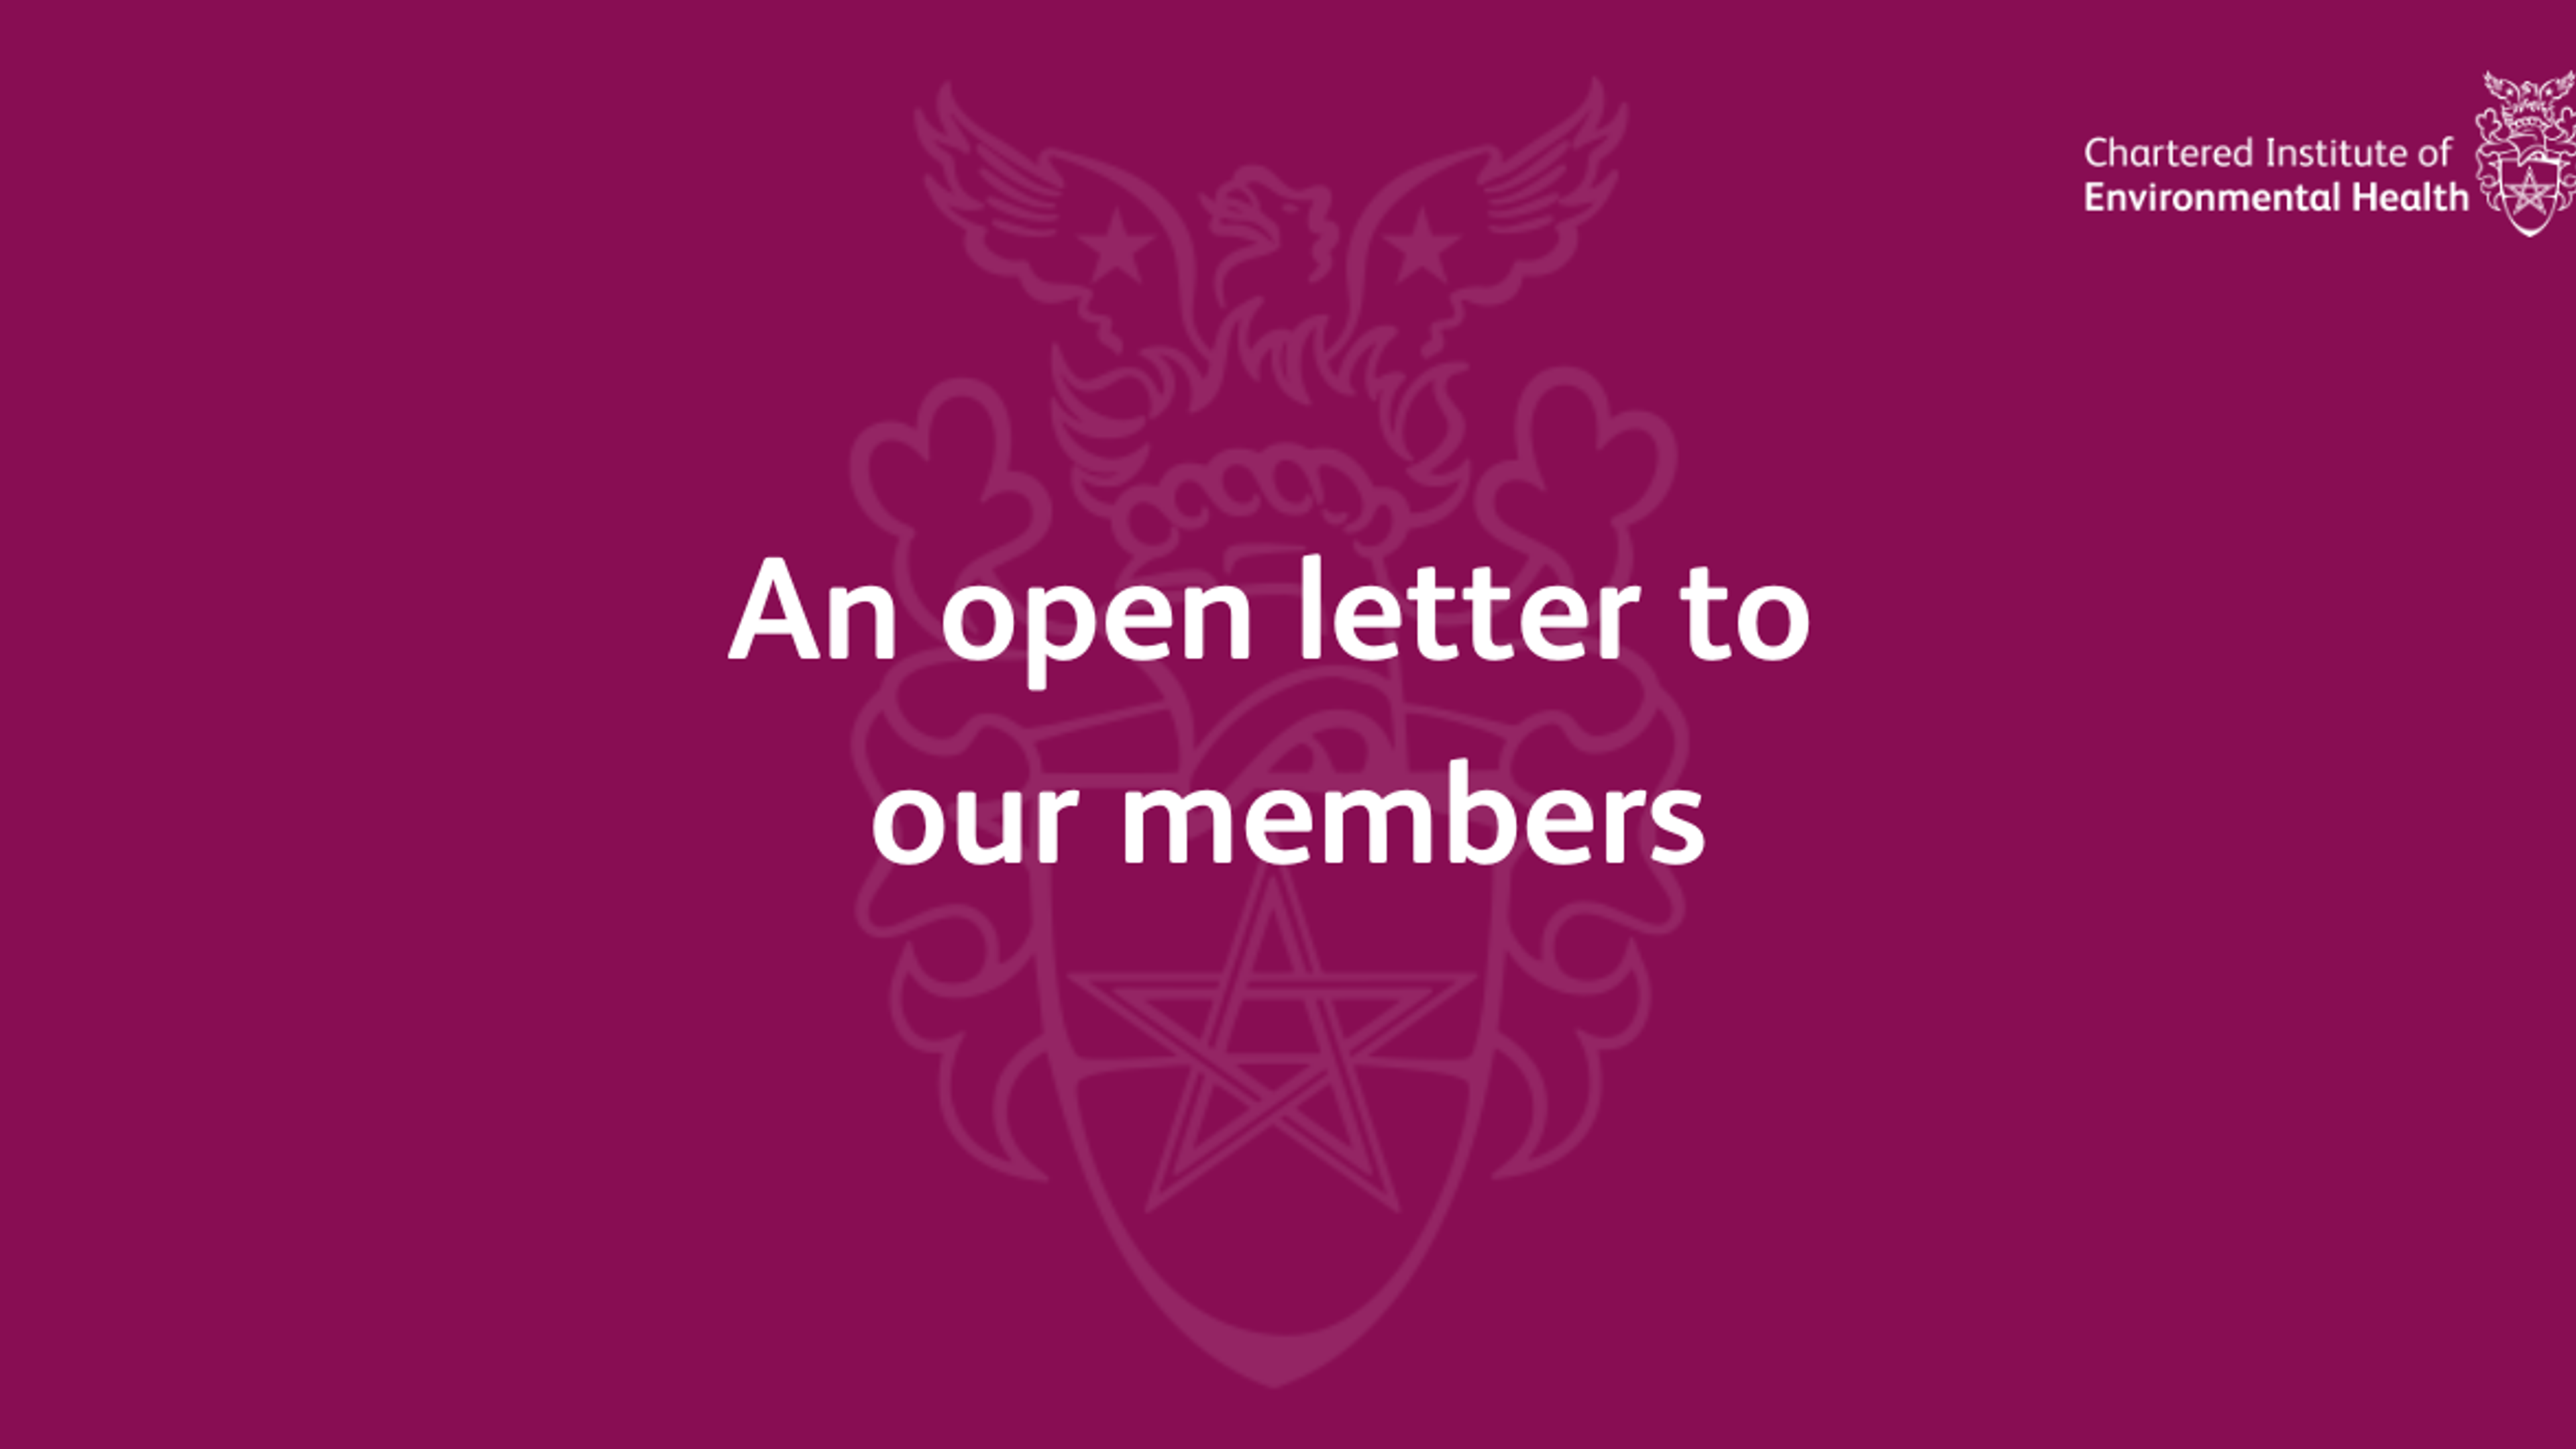 Open letter to CIEH members